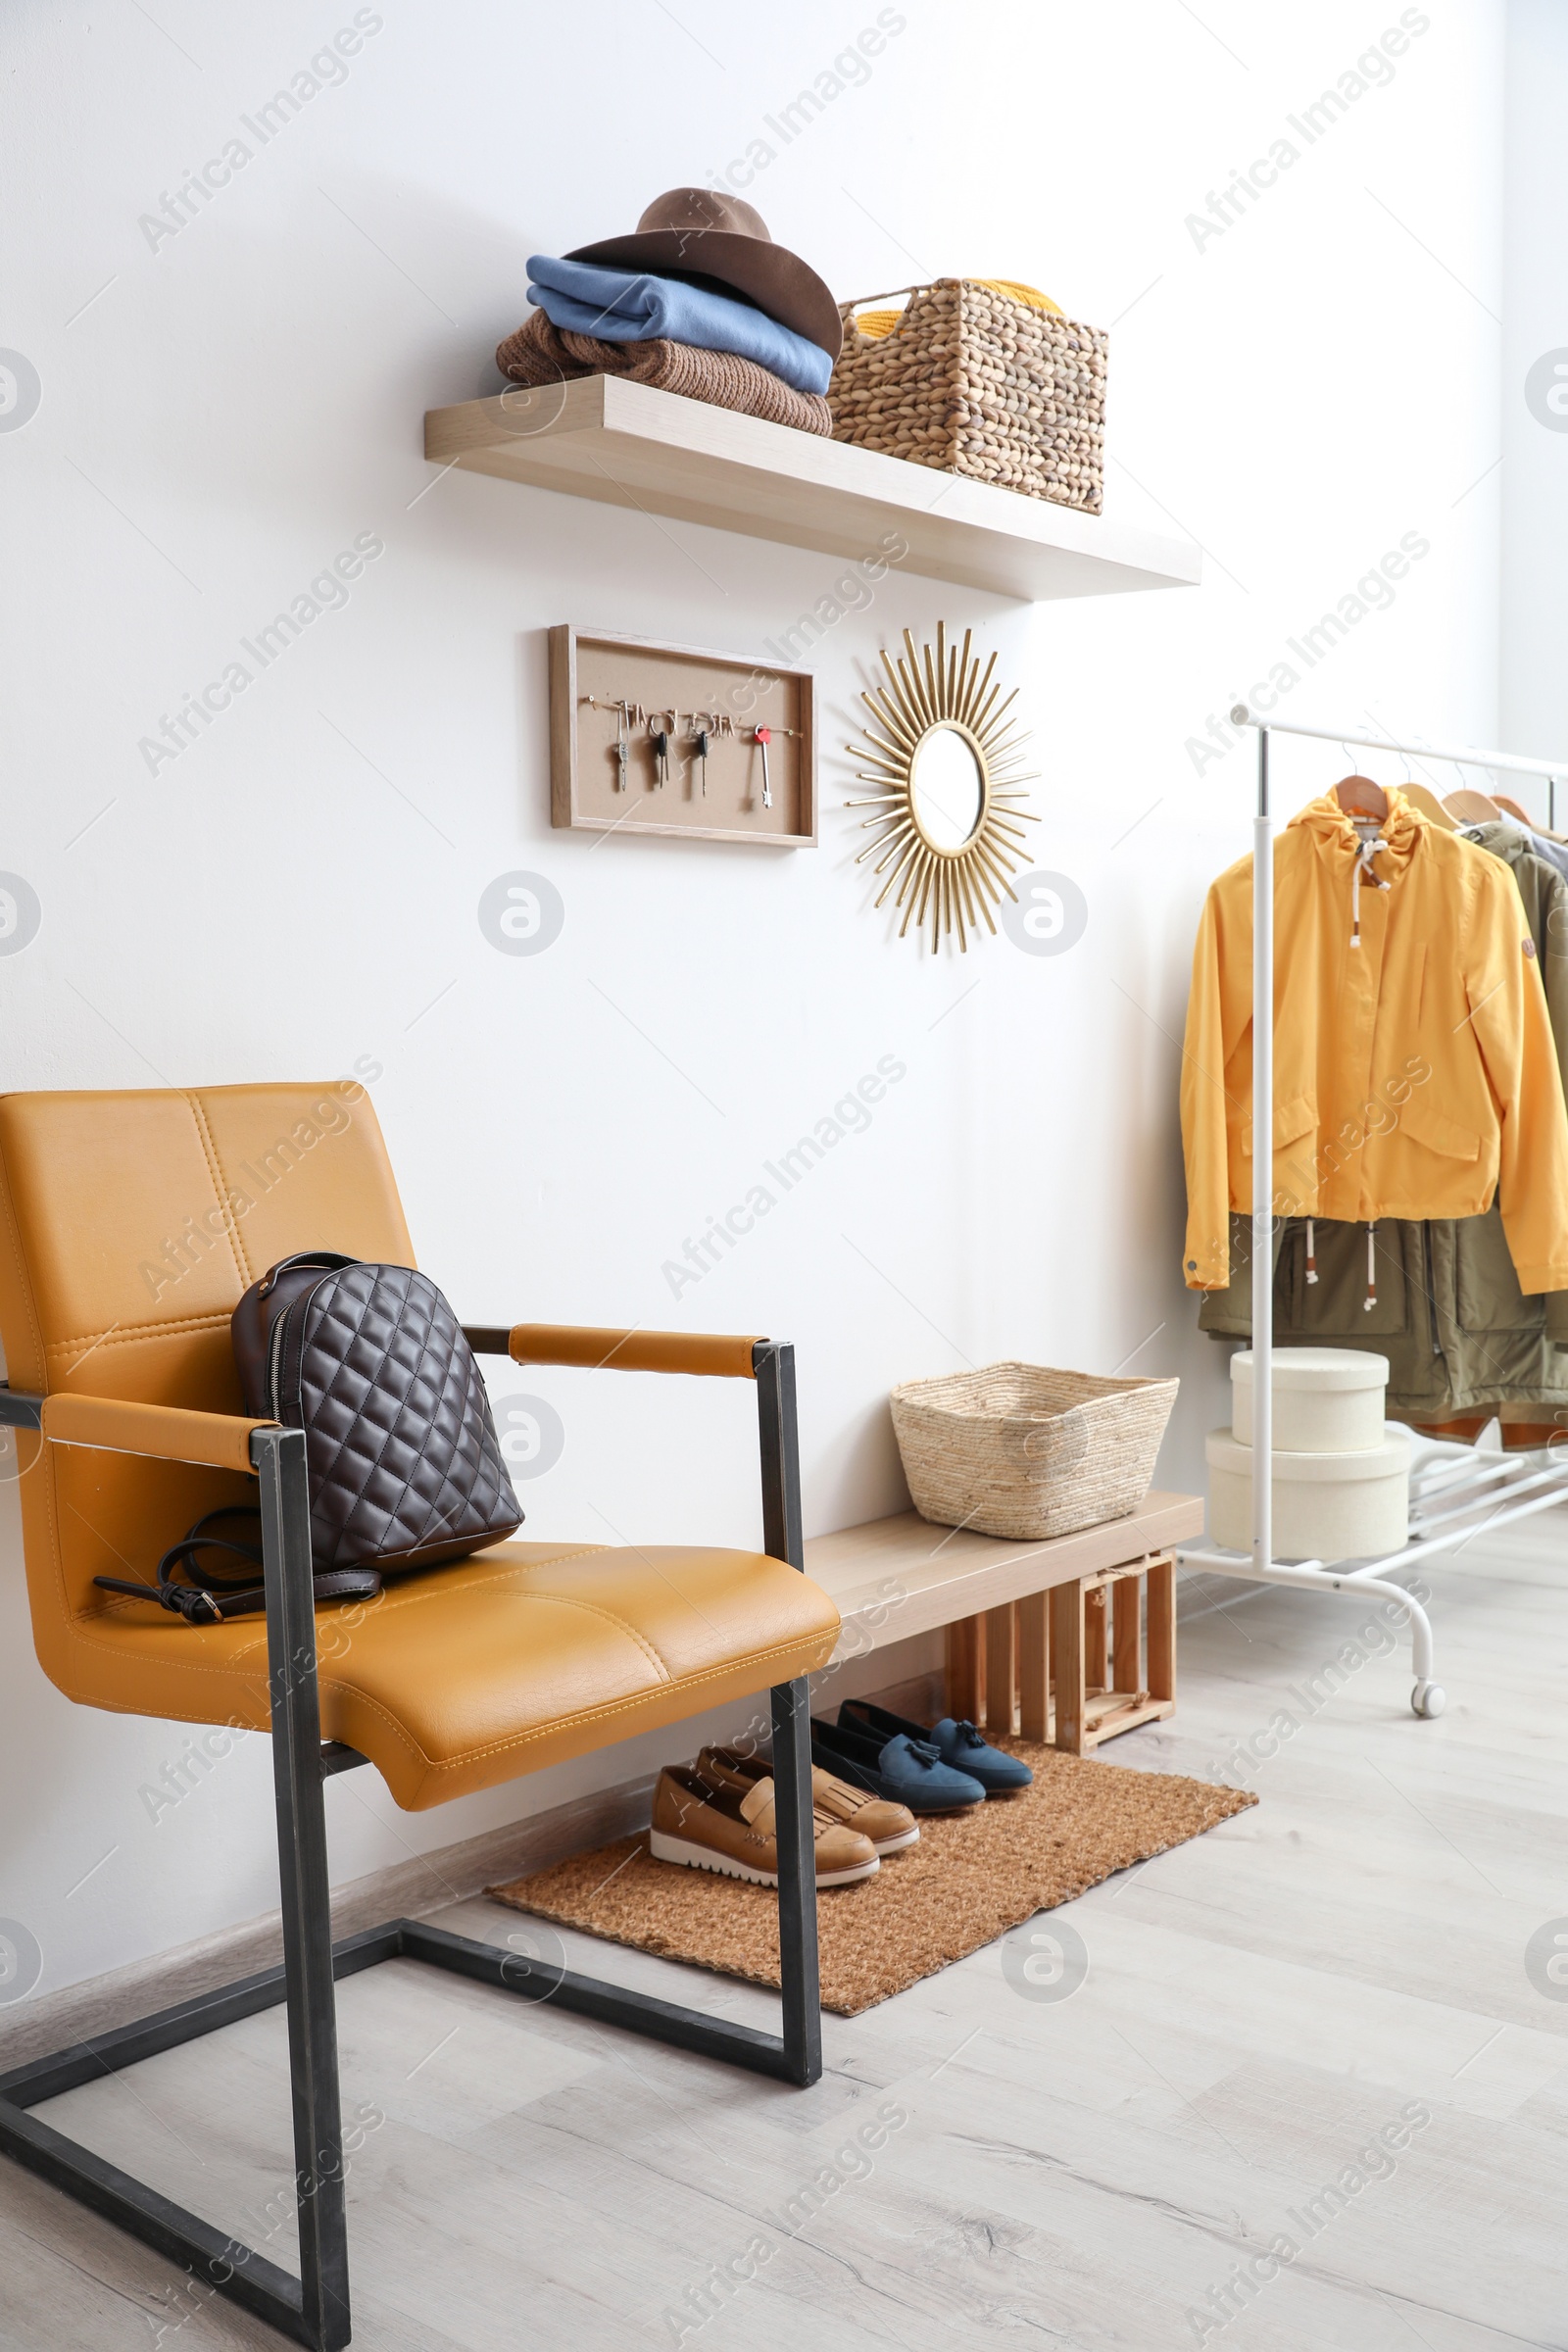 Photo of Hallway interior with stylish furniture, clothes and accessories
